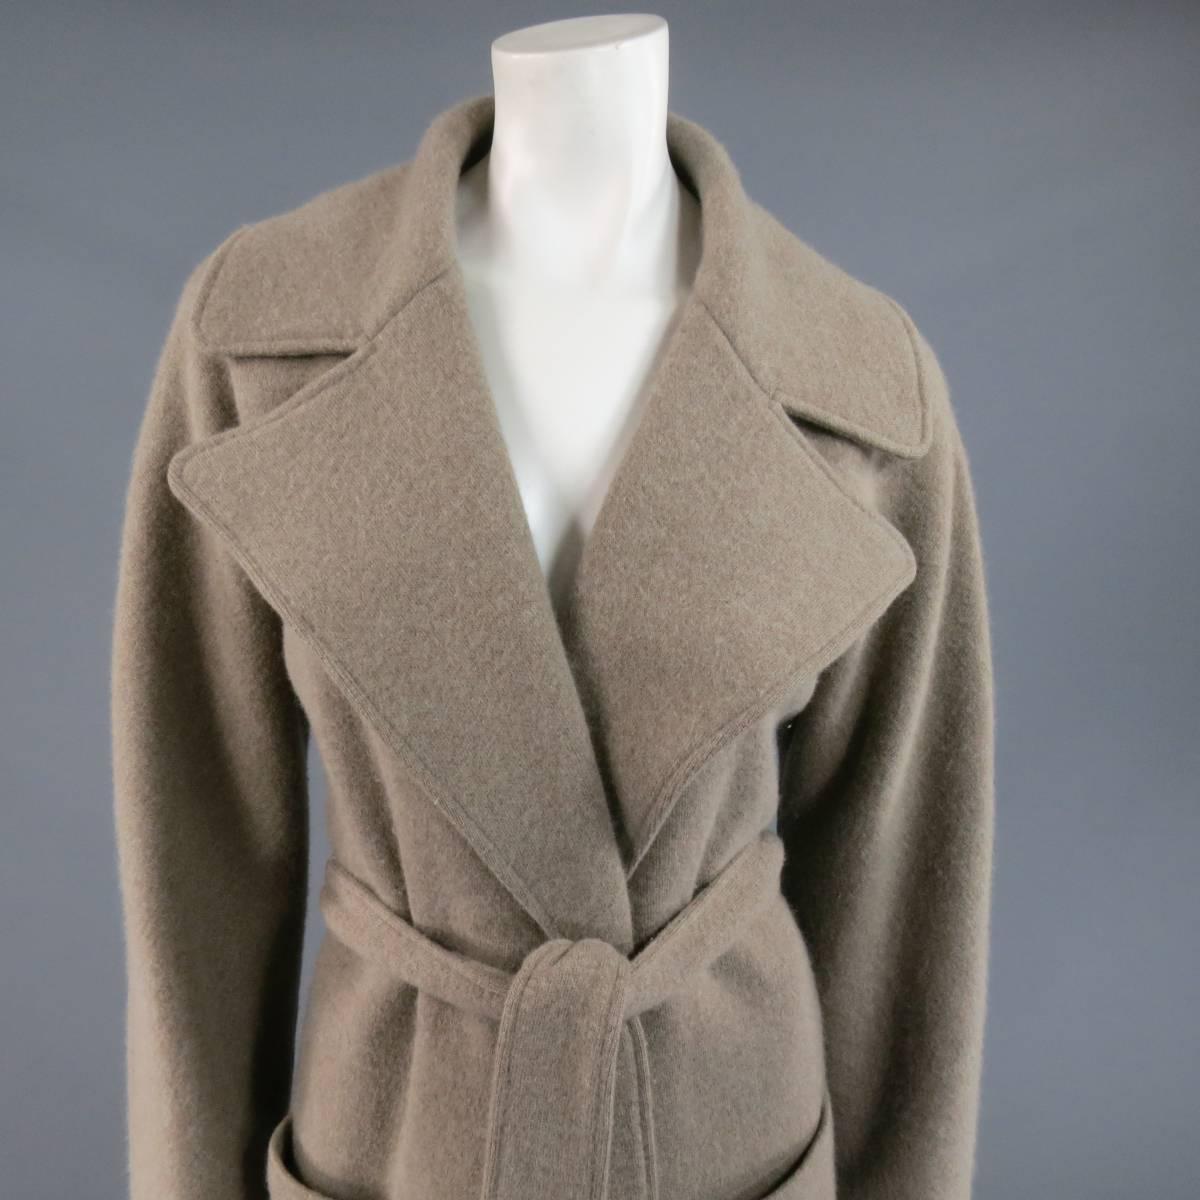 This lovely RALPH LAUREN BLACK LABEL cardigan coat comes in a soft oatmeal taupe colored stretch wool Angroa felt material and features a wide pointed collar lapel, double patch pockets, open front, and waist tie belt.
Retails at $2995.00.

Good